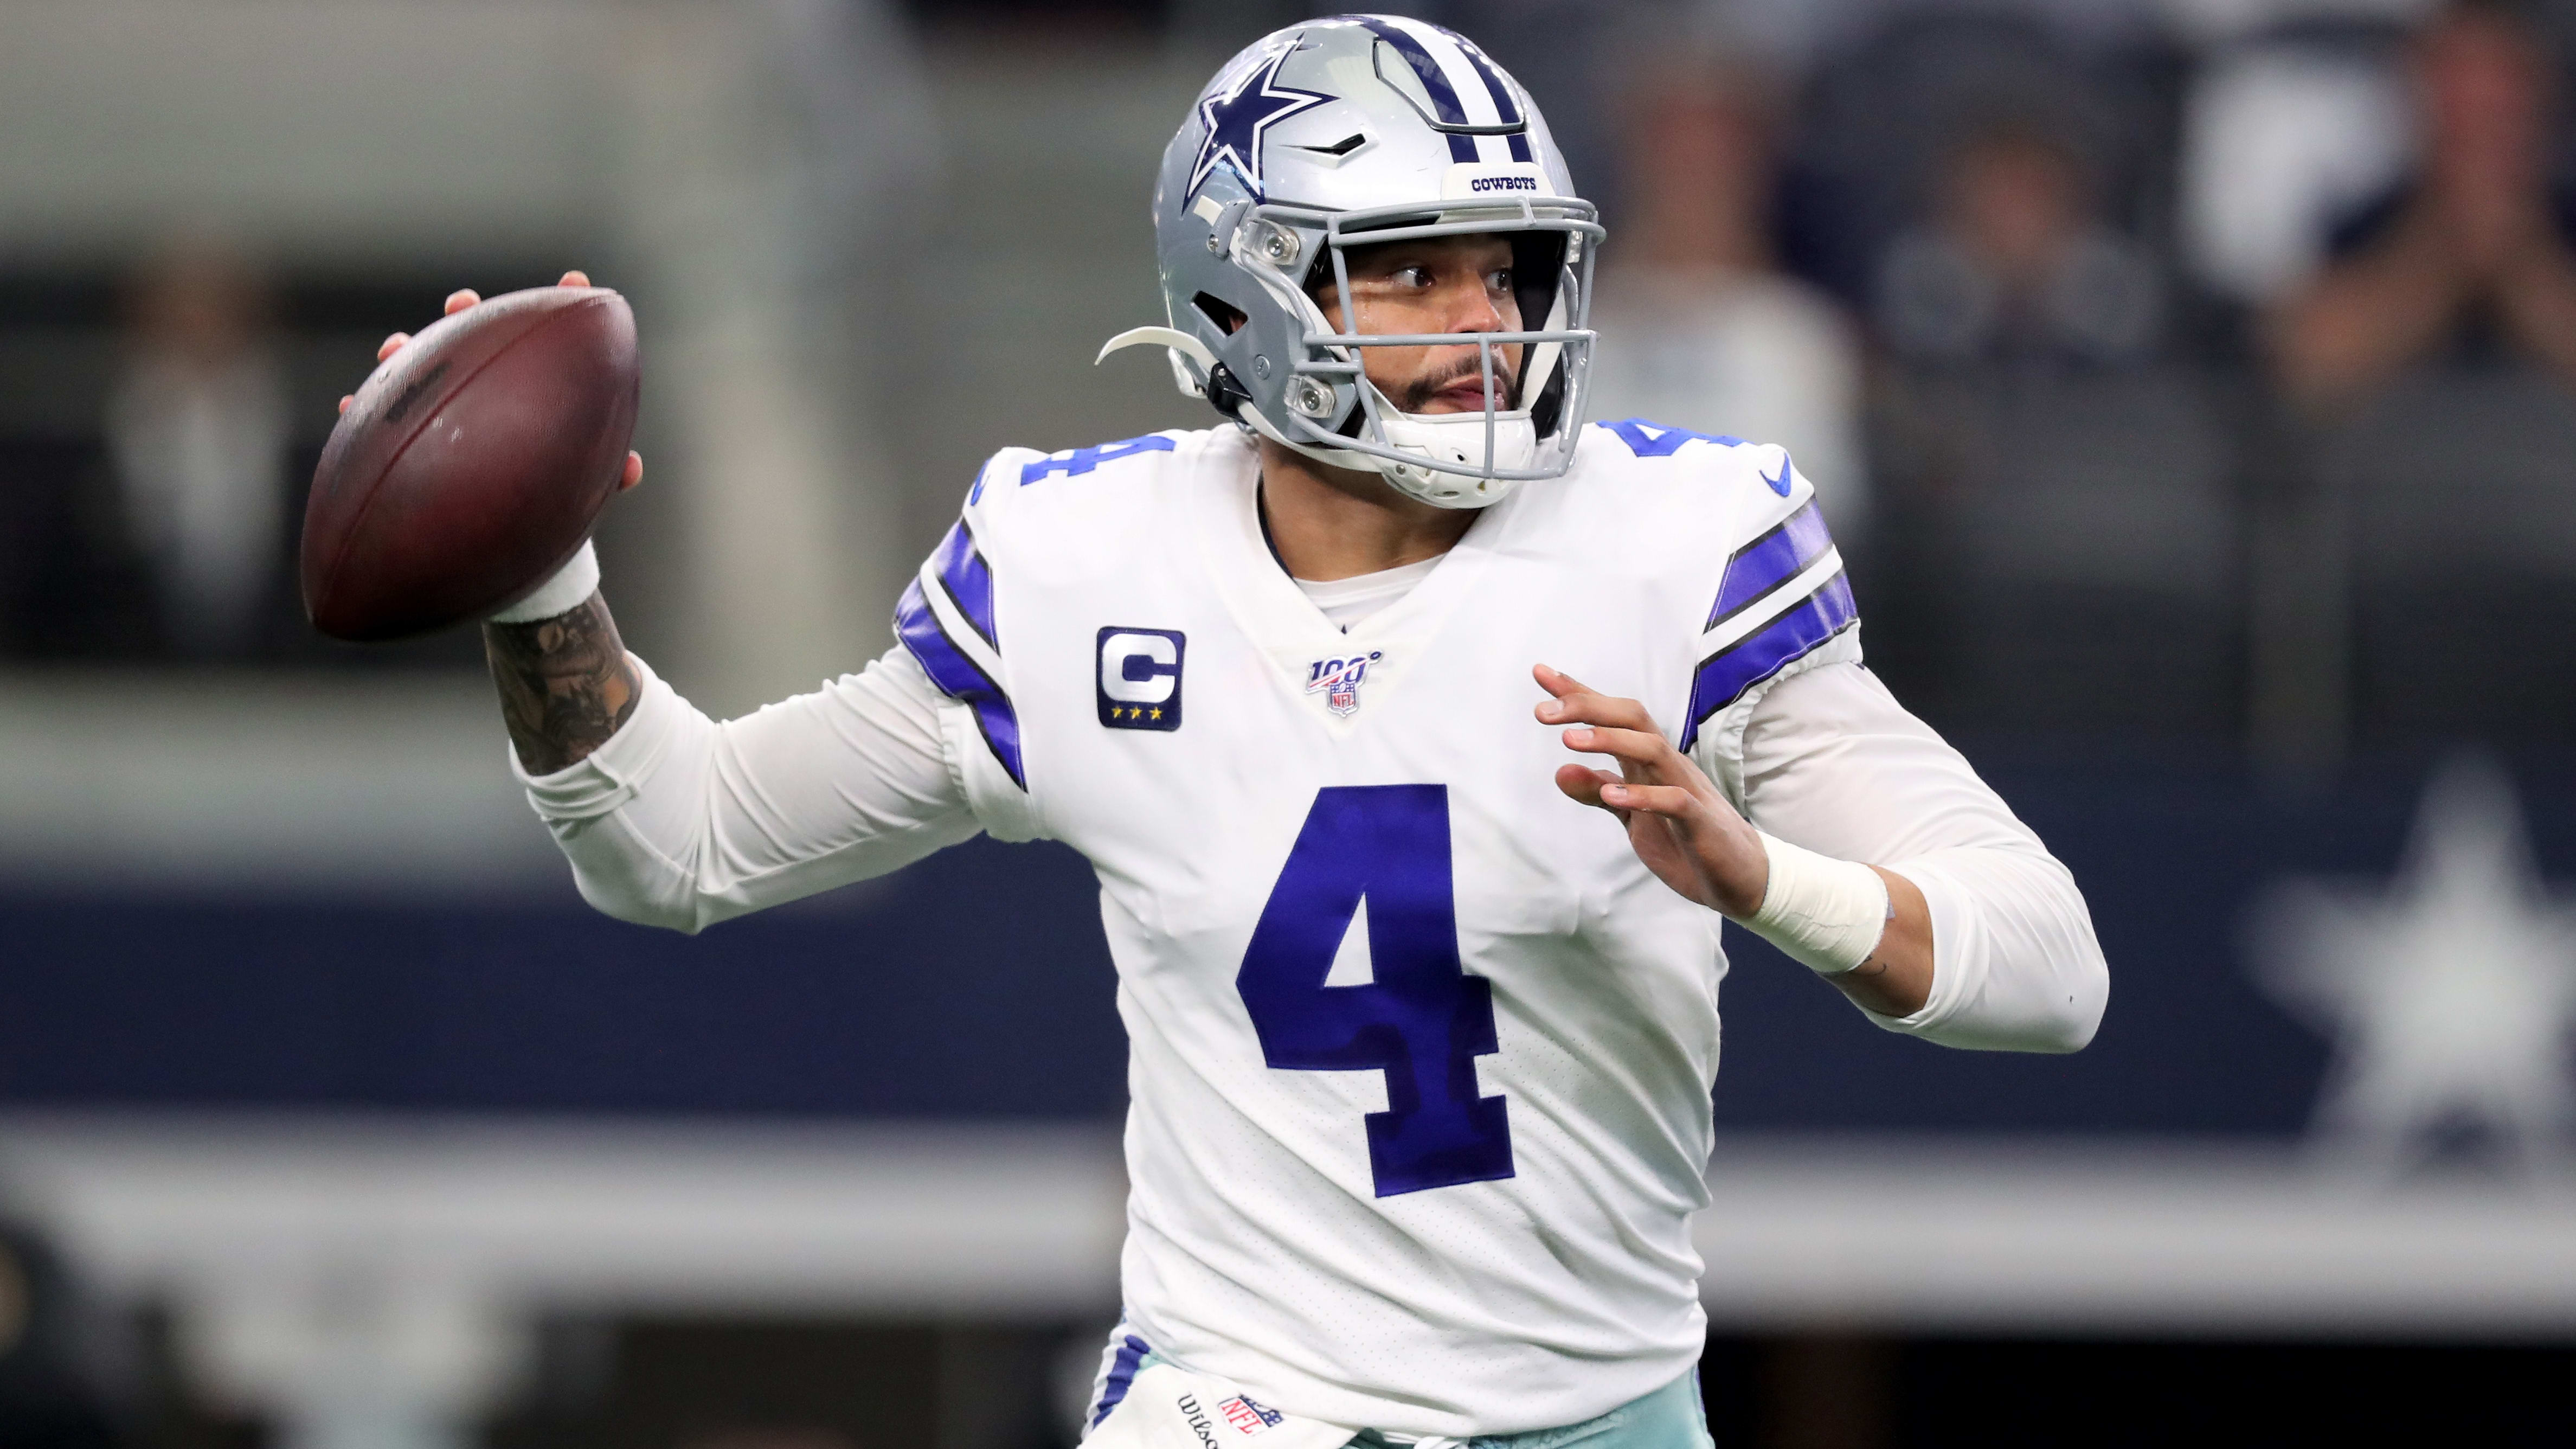 Dak Prescott Record Against Playoff Teams Proves He's Overrated